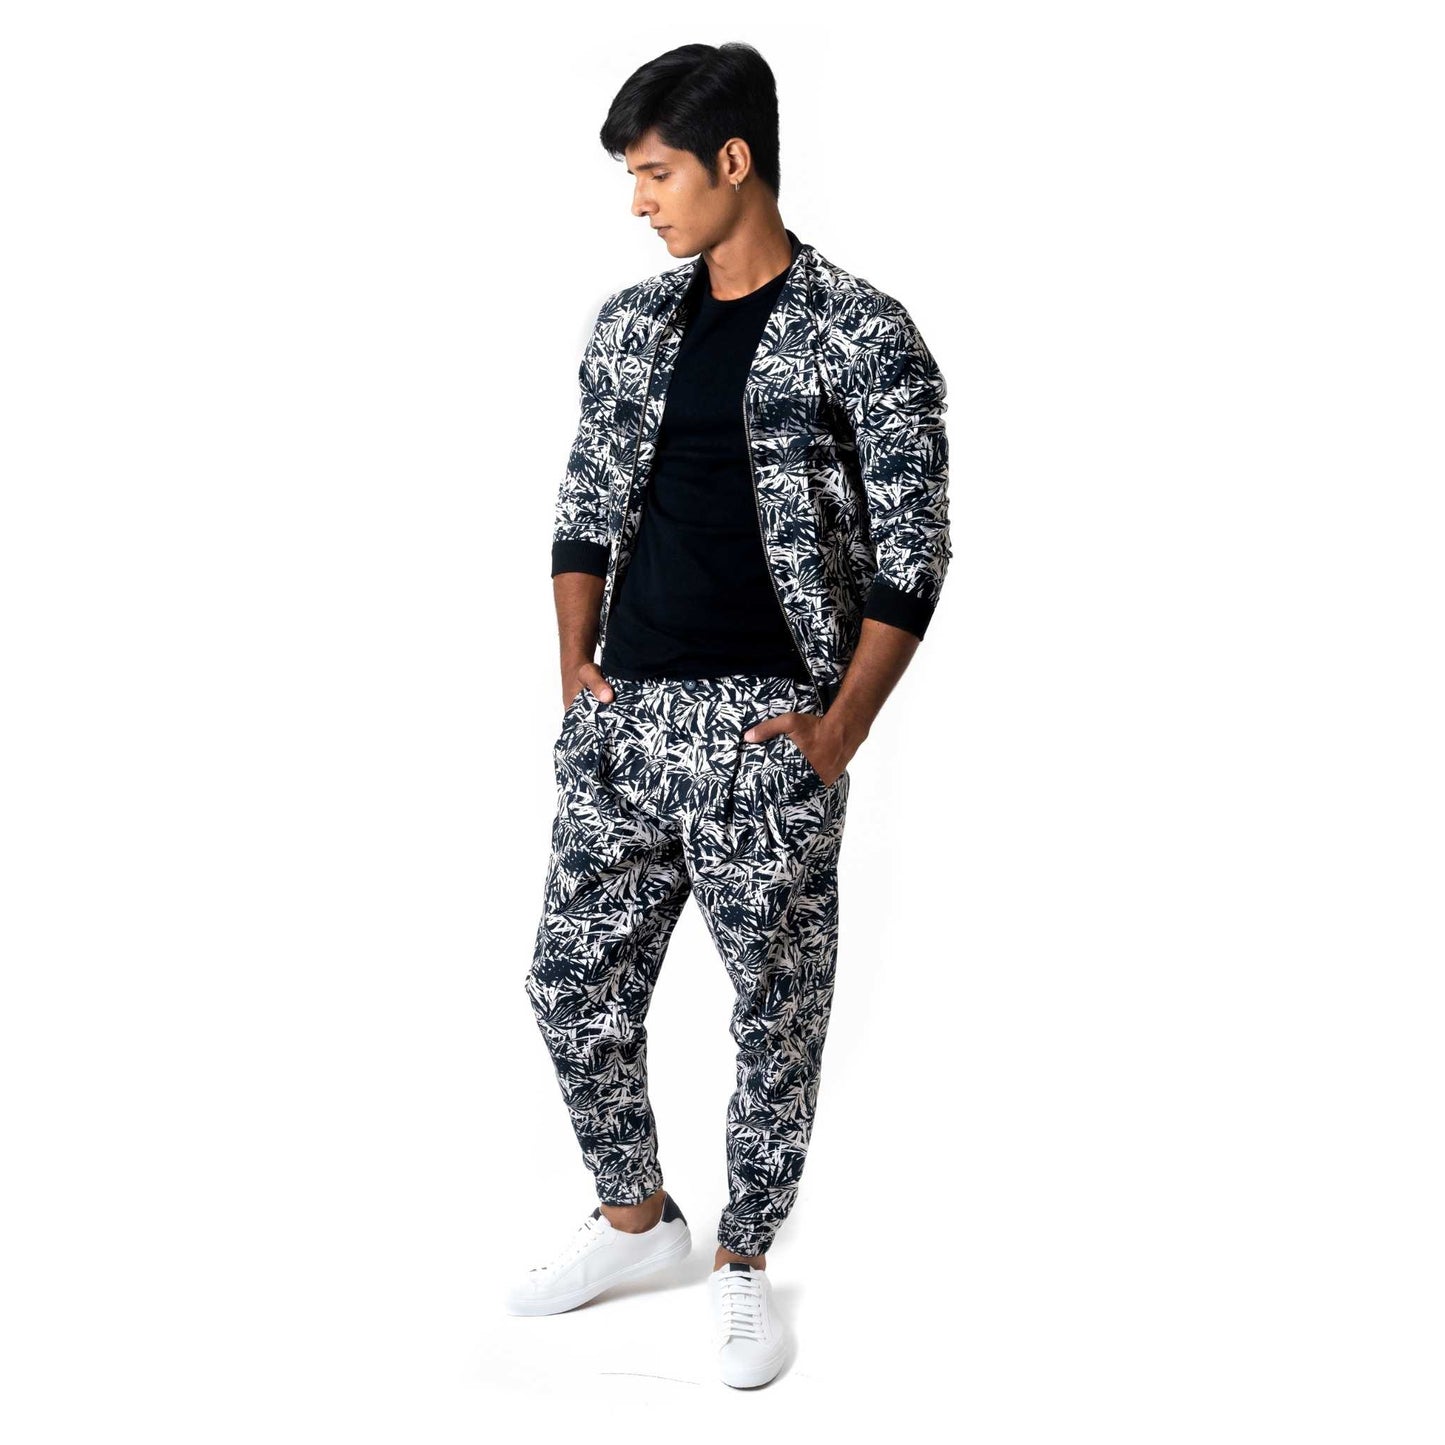 Bomber jacket and joggers co-ord set in black & white palm leaf printed cotton